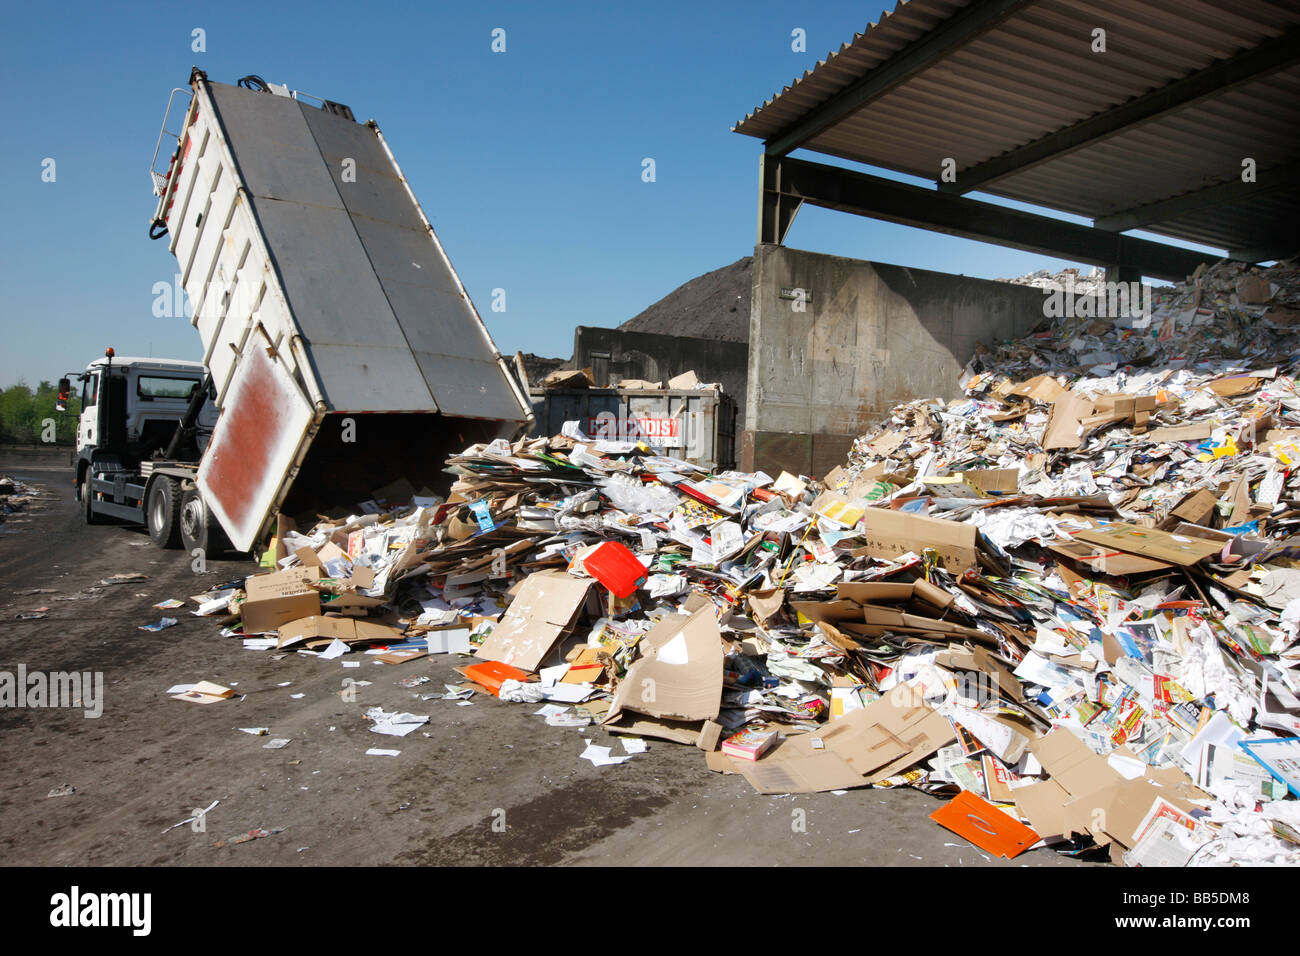 Waste paper collection, container service, domestic refuse collection, Gelsenkirchen, Germany Stock Photo